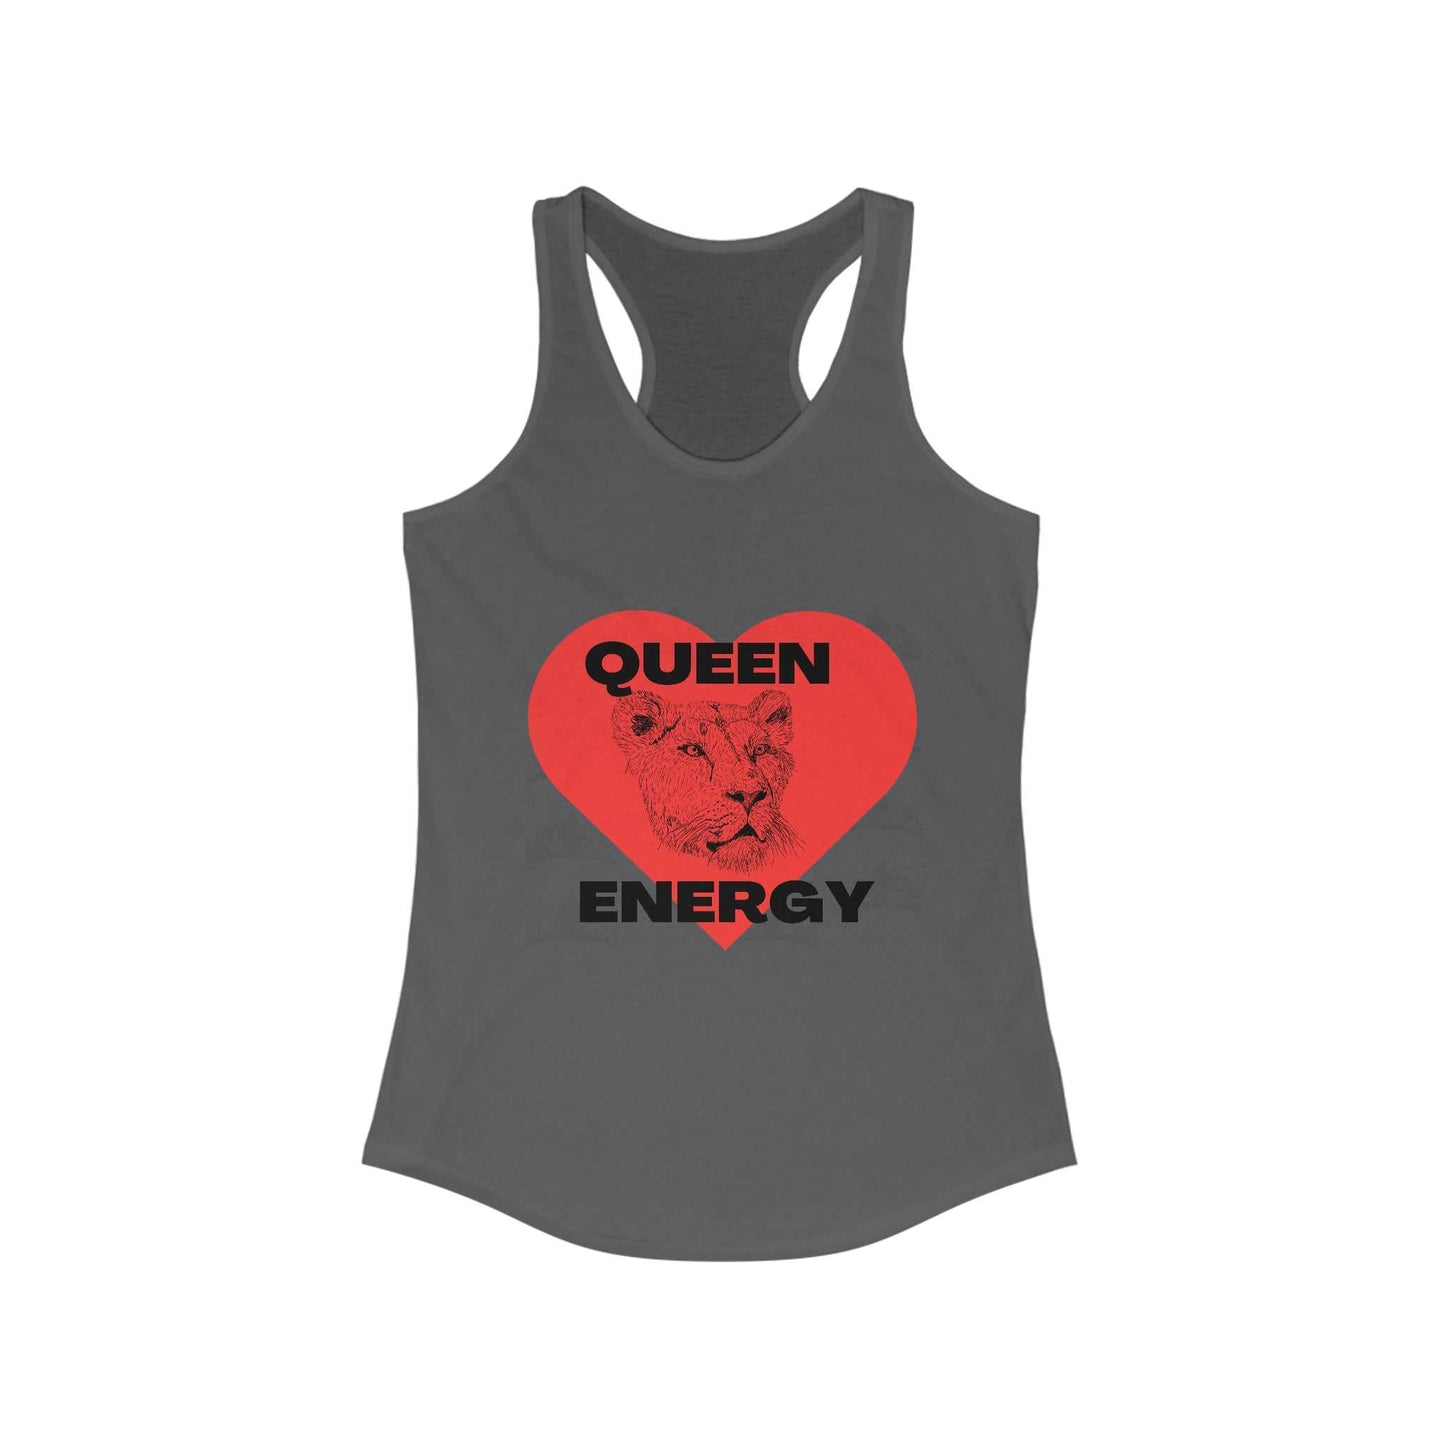 Queen Energy Women's Ideal Racerback Tank T-shirts and Tanks Tank Top Good Vibes Daily Lab 23